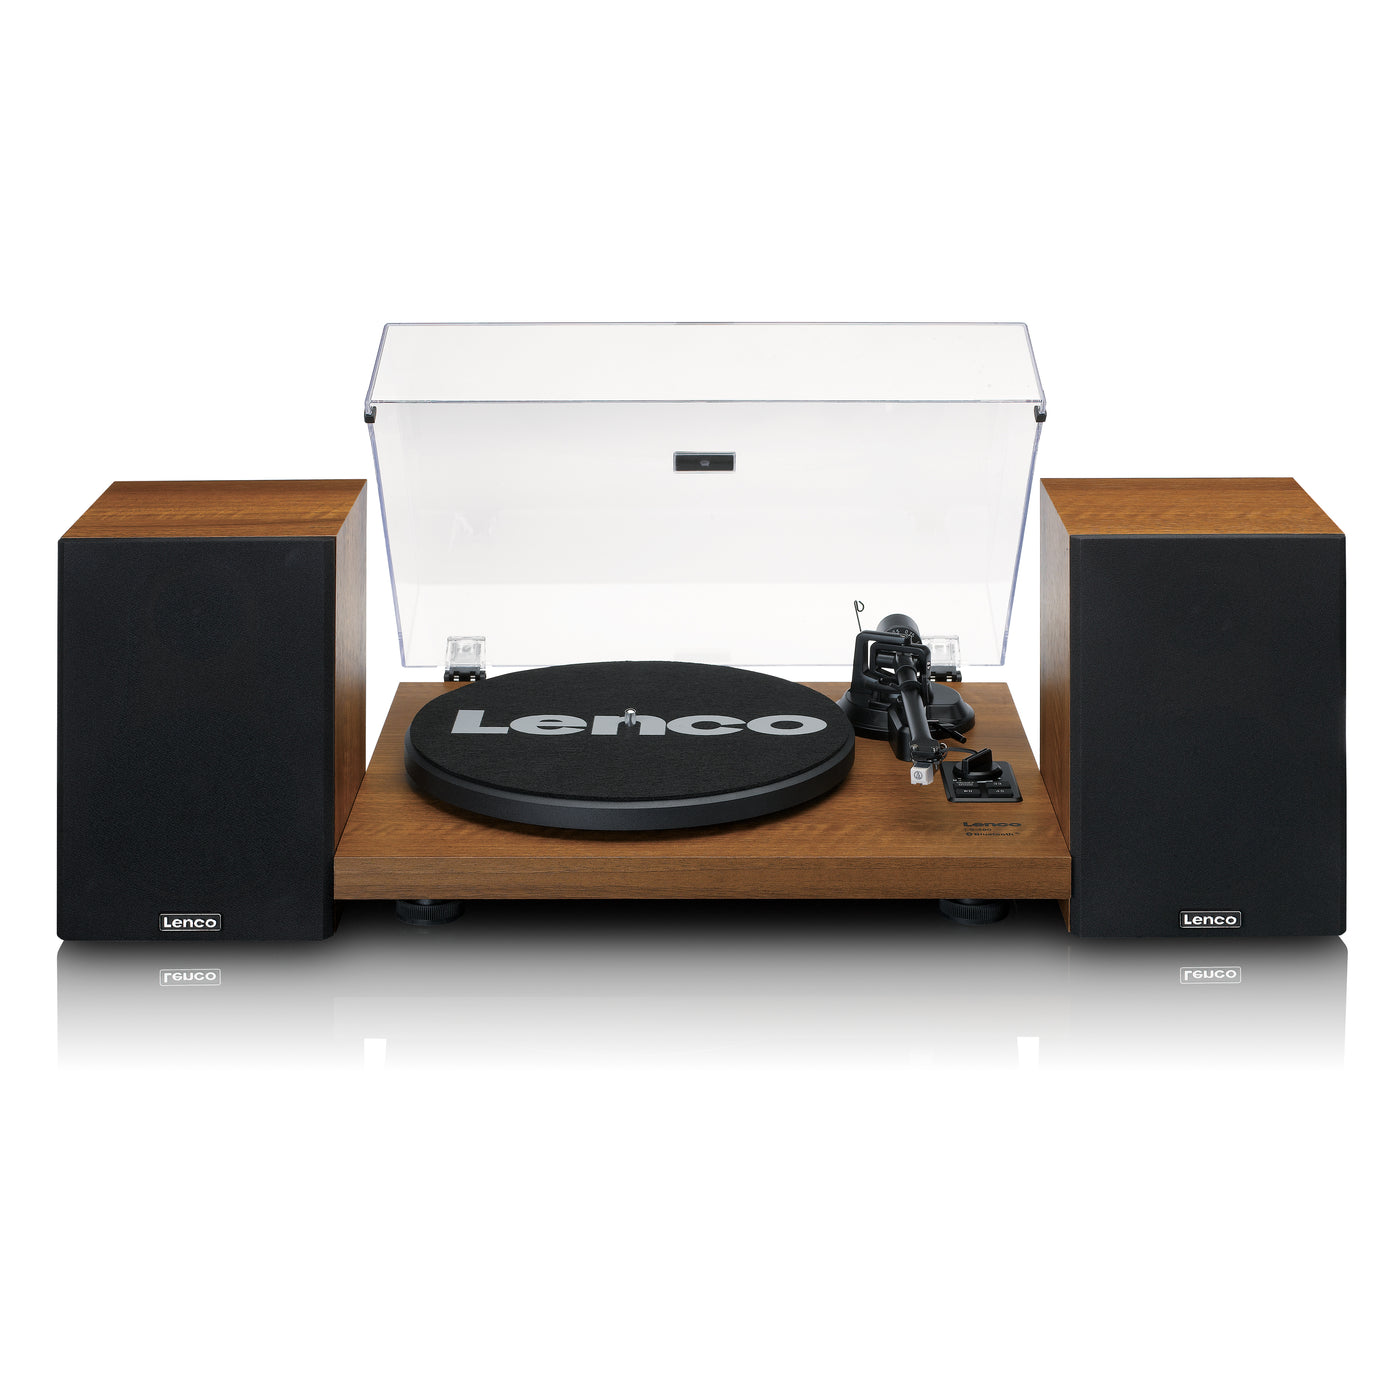 LENCO LS-480WD - Record player with Built-in amplifier and Bluetooth® plus 2 external speakers - Wood